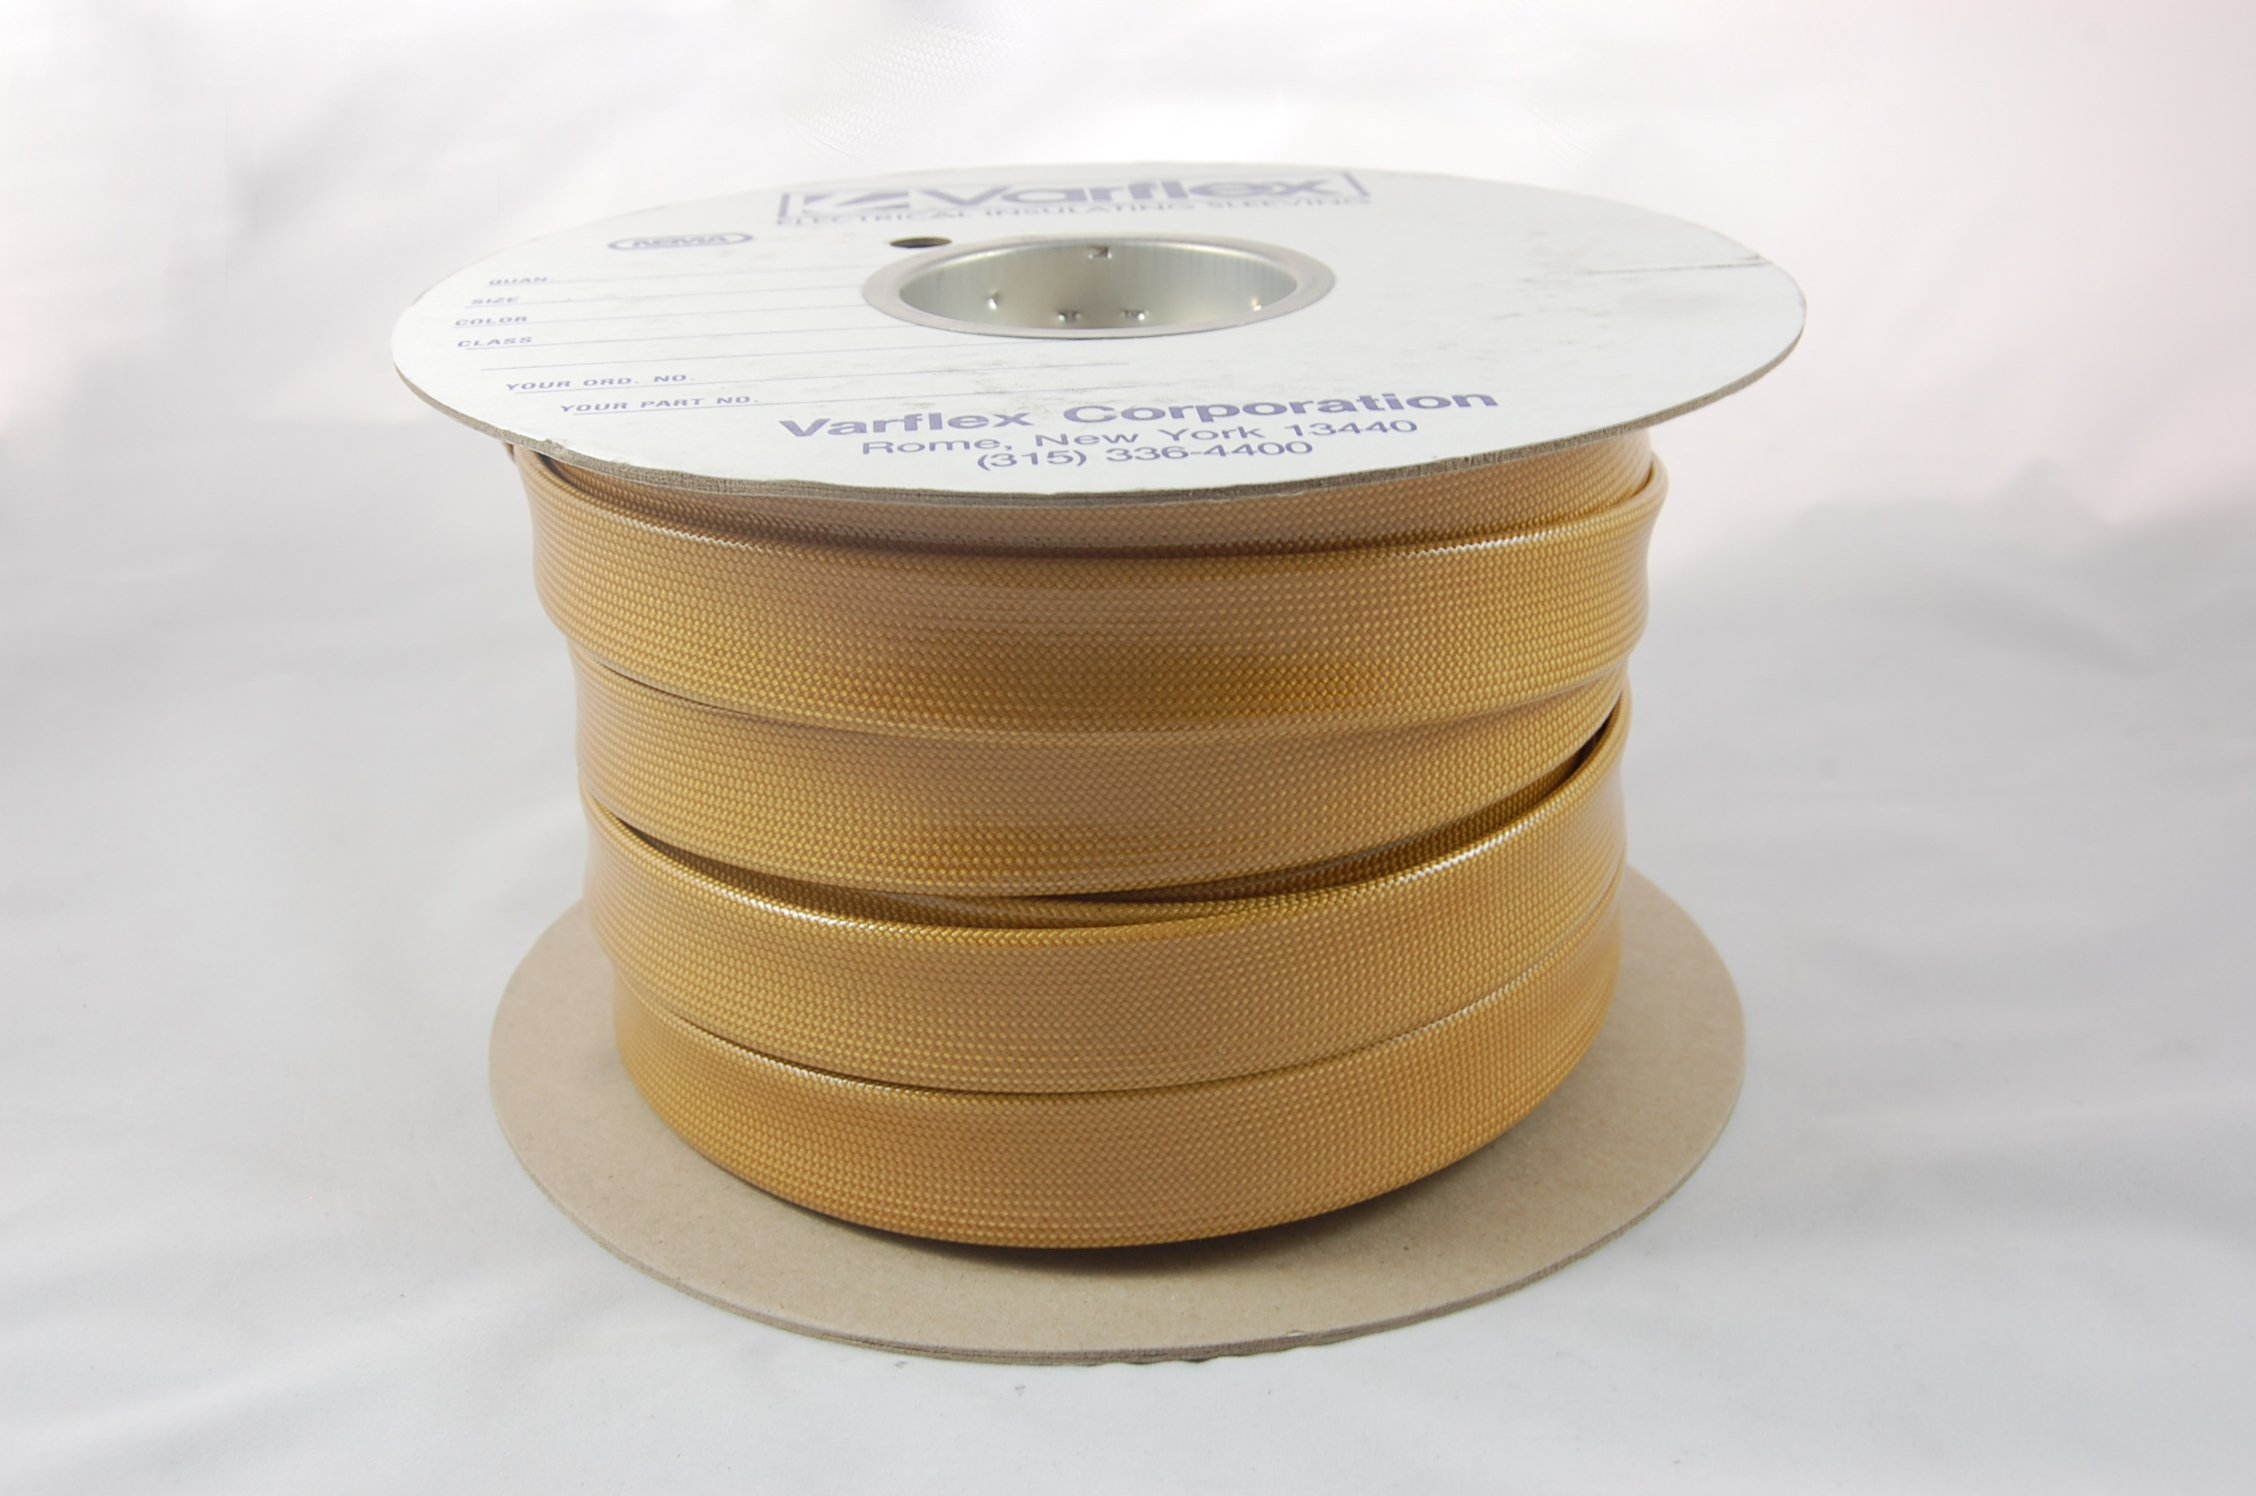 5/8" AWG Varglas Silicone Resin 500 Grade H-A-1 (8000V) High Temperature Silicone Resin Coated Braided Fiberglass Sleeving 200°C, natural, 100 FT per spool